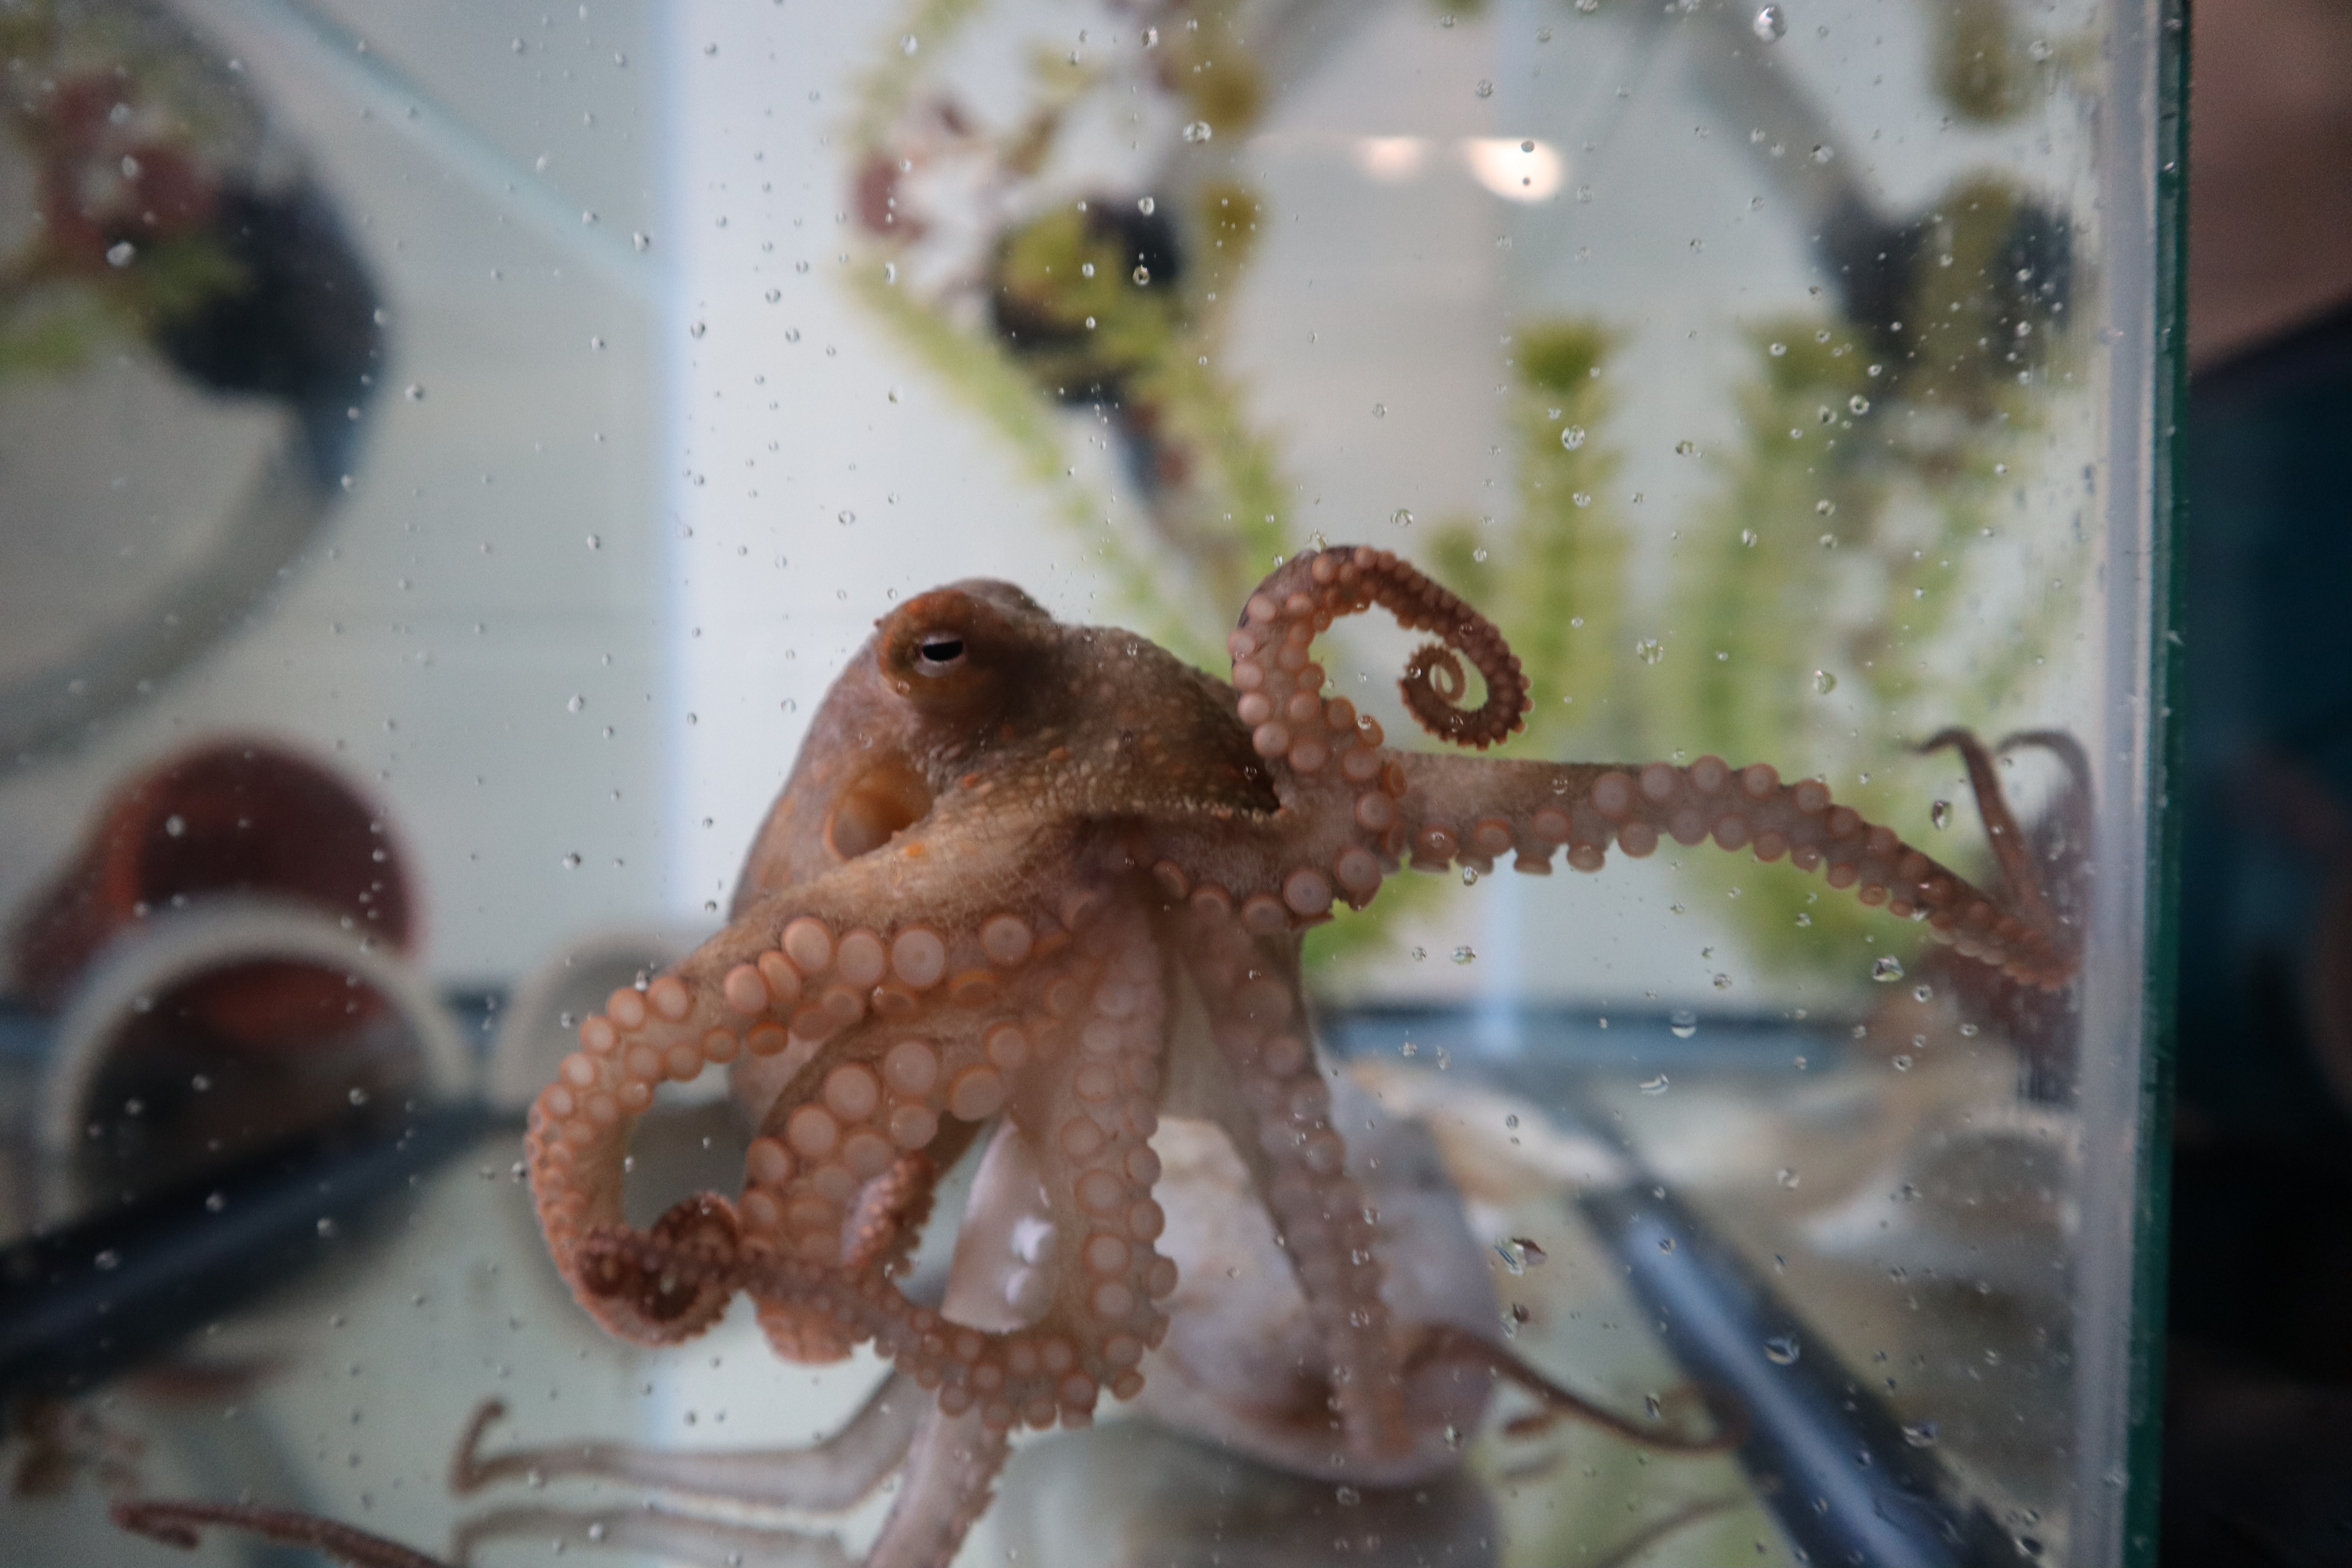 California two-spot octopus (O. bimaculoides) at the Marine Resources Center. Photo by Nora Bradford.